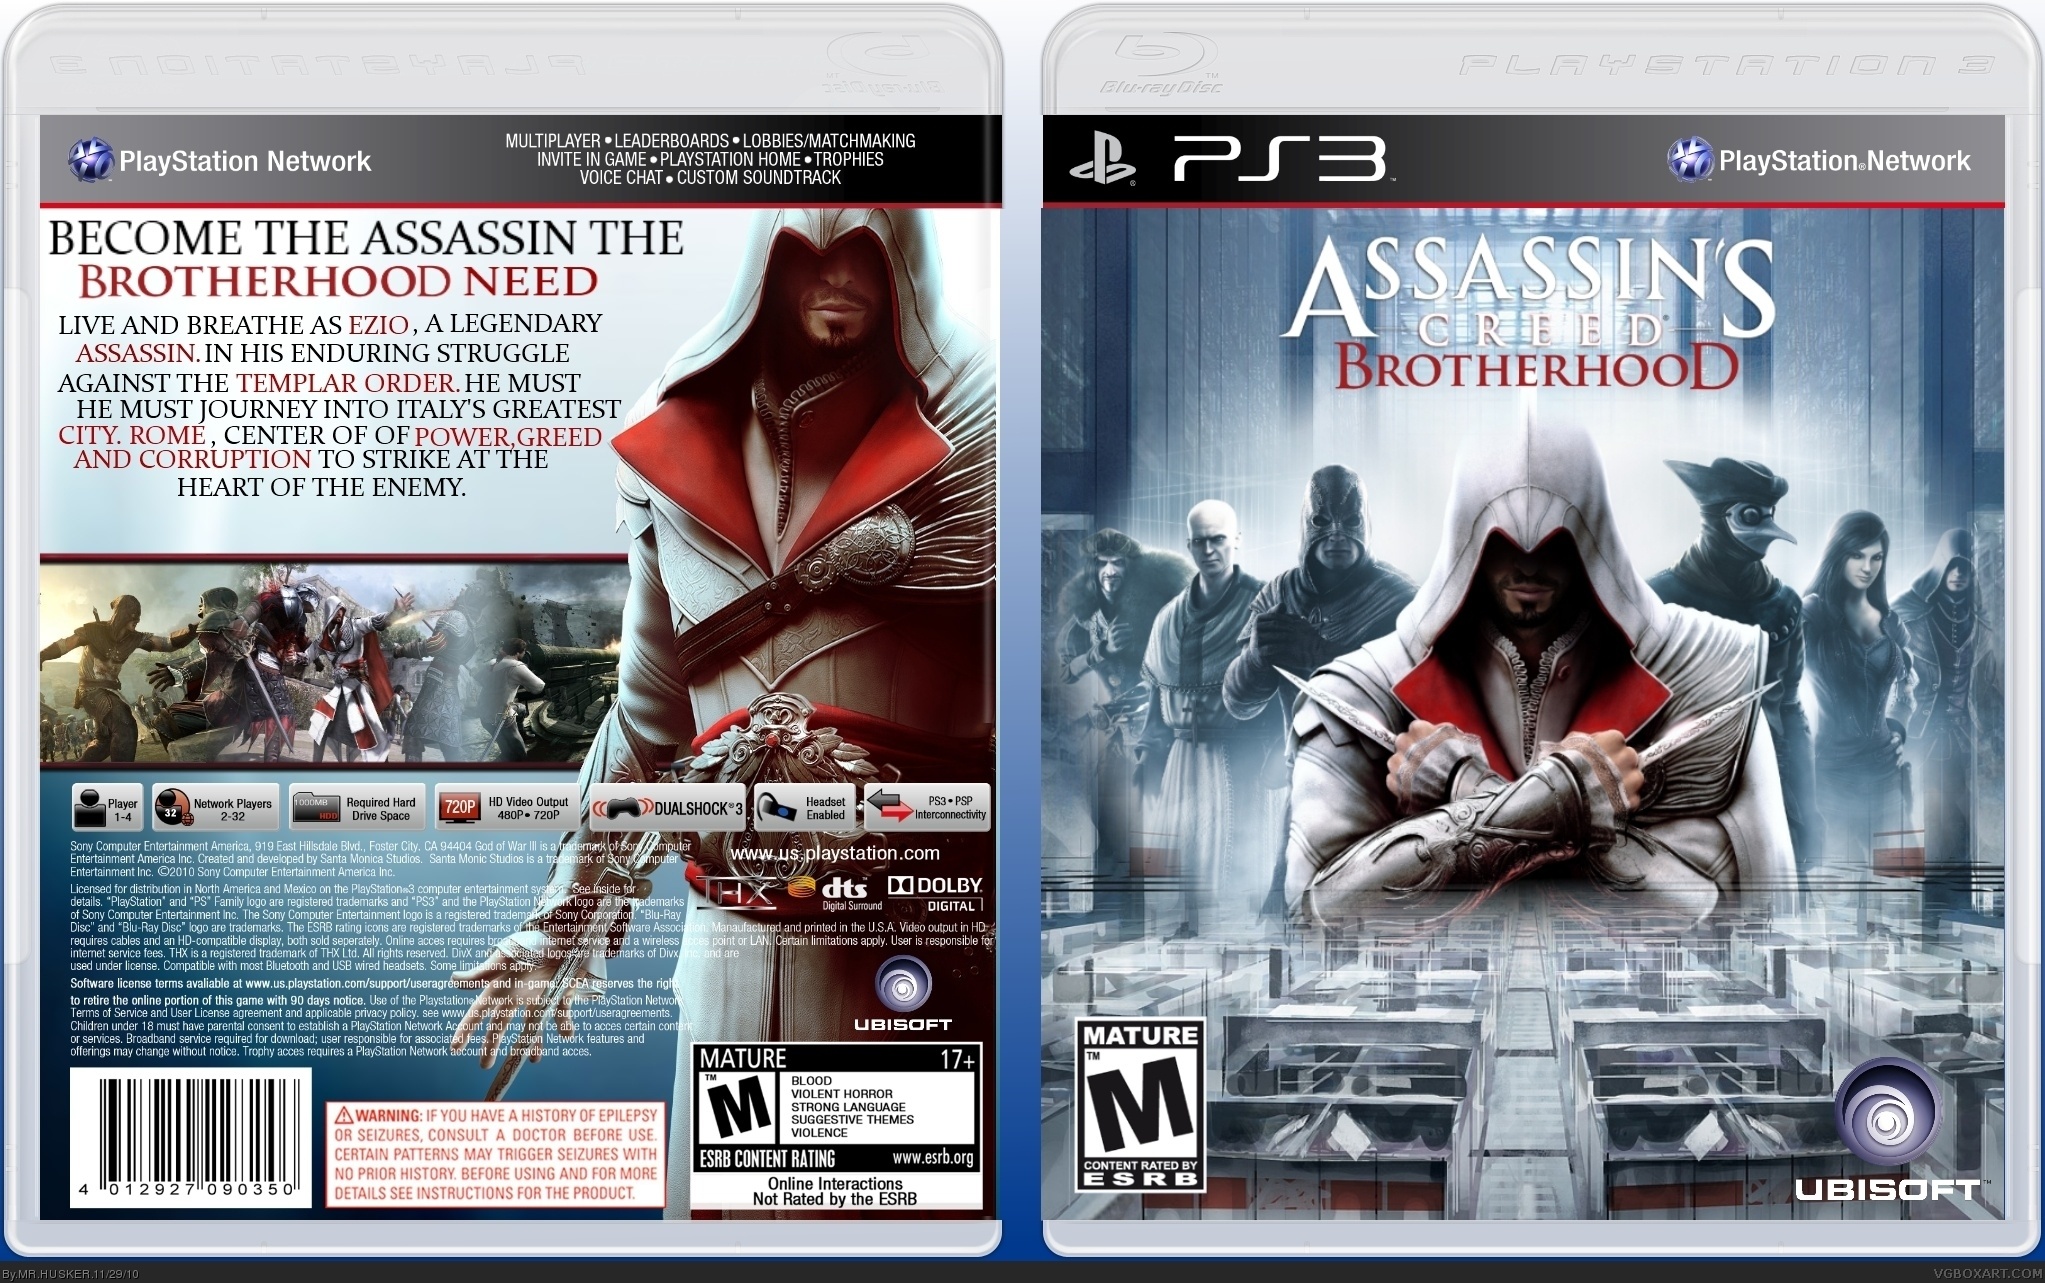 Assassin's Creed PlayStation 3 Box Art Cover by Blairy_boy